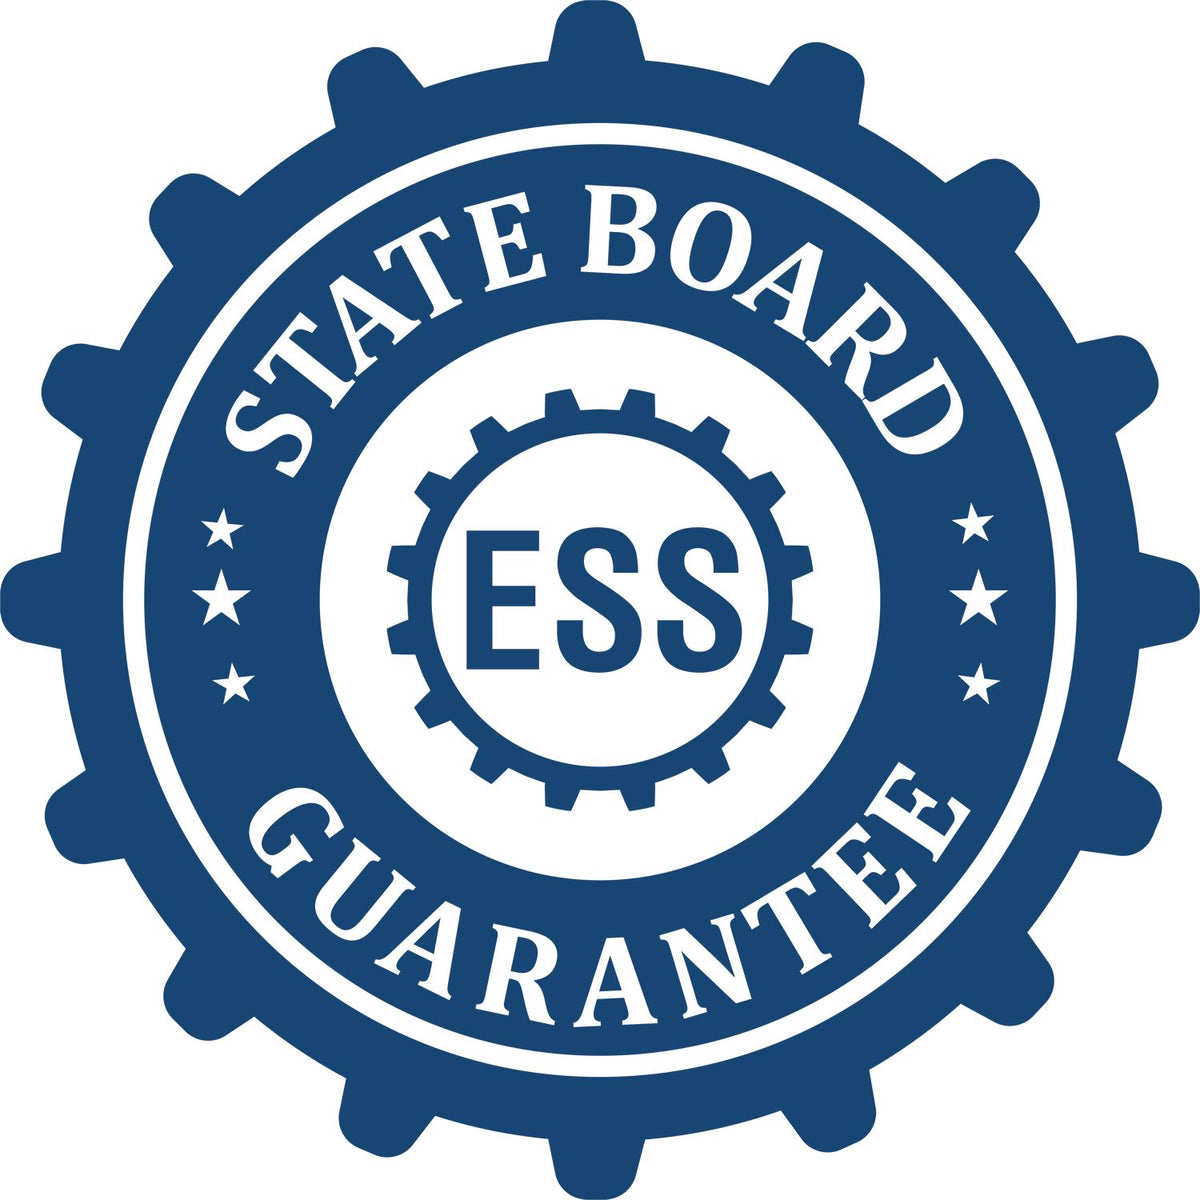 An emblem in a gear shape illustrating a state board guarantee for the Digital Arizona PE Stamp and Electronic Seal for Arizona Engineer product.